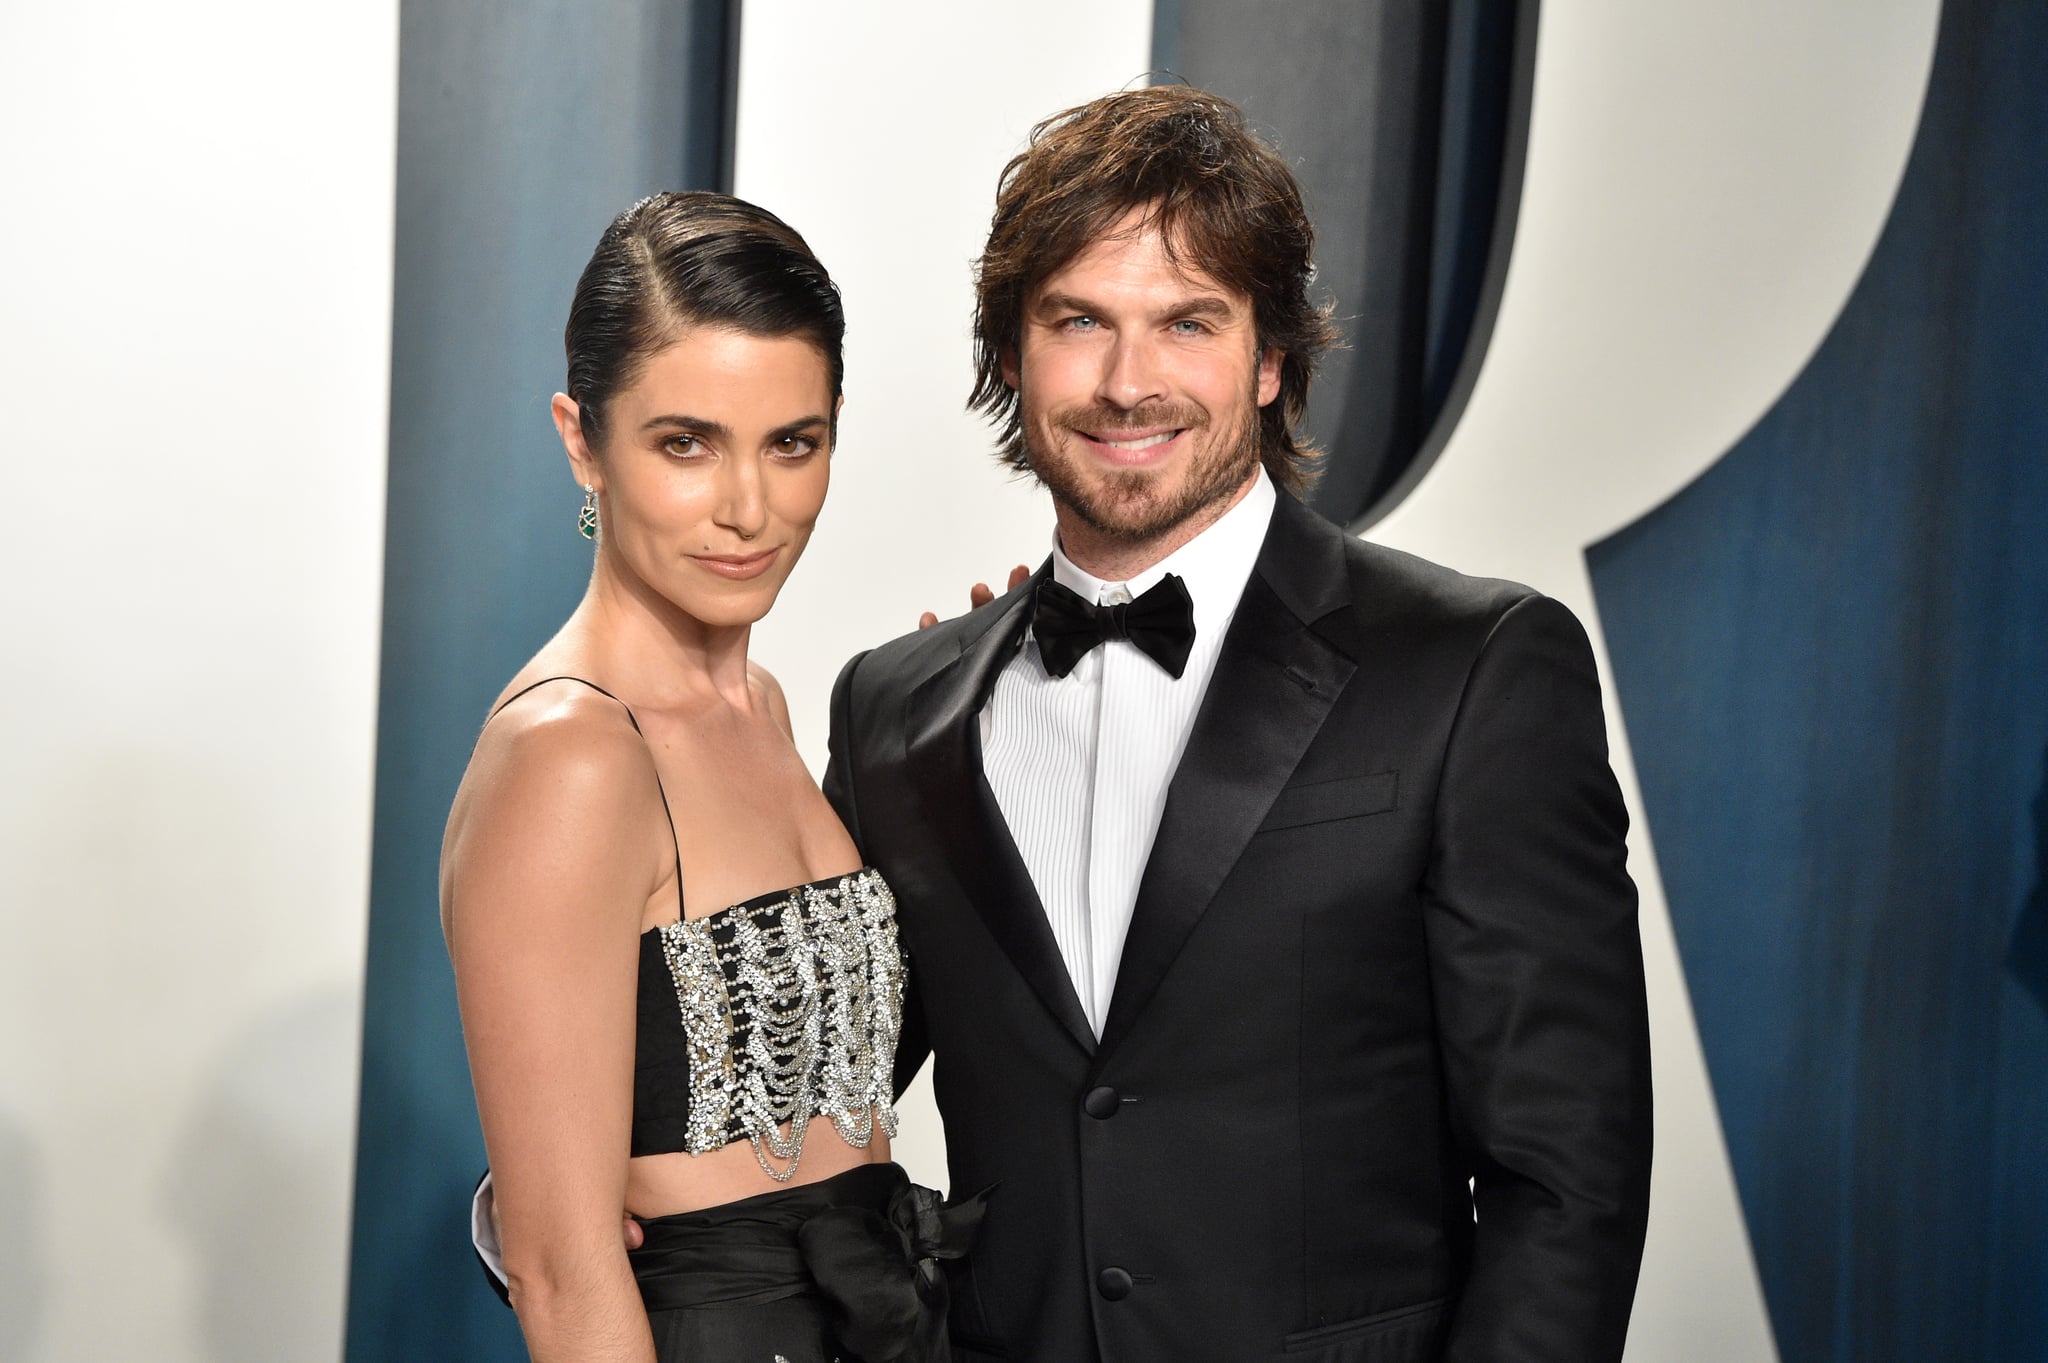 BEVERLY HILLS, CALIFORNIA - FEBRUARY 09: Nikki Reed and Ian Somerhalder attends the 2020 Vanity Fair Oscar Party hosted by Radhika Jones at Wallis Annenberg Centre for the Performing Arts on February 09, 2020 in Beverly Hills, California. (Photo by Gregg DeGuire/FilmMagic)